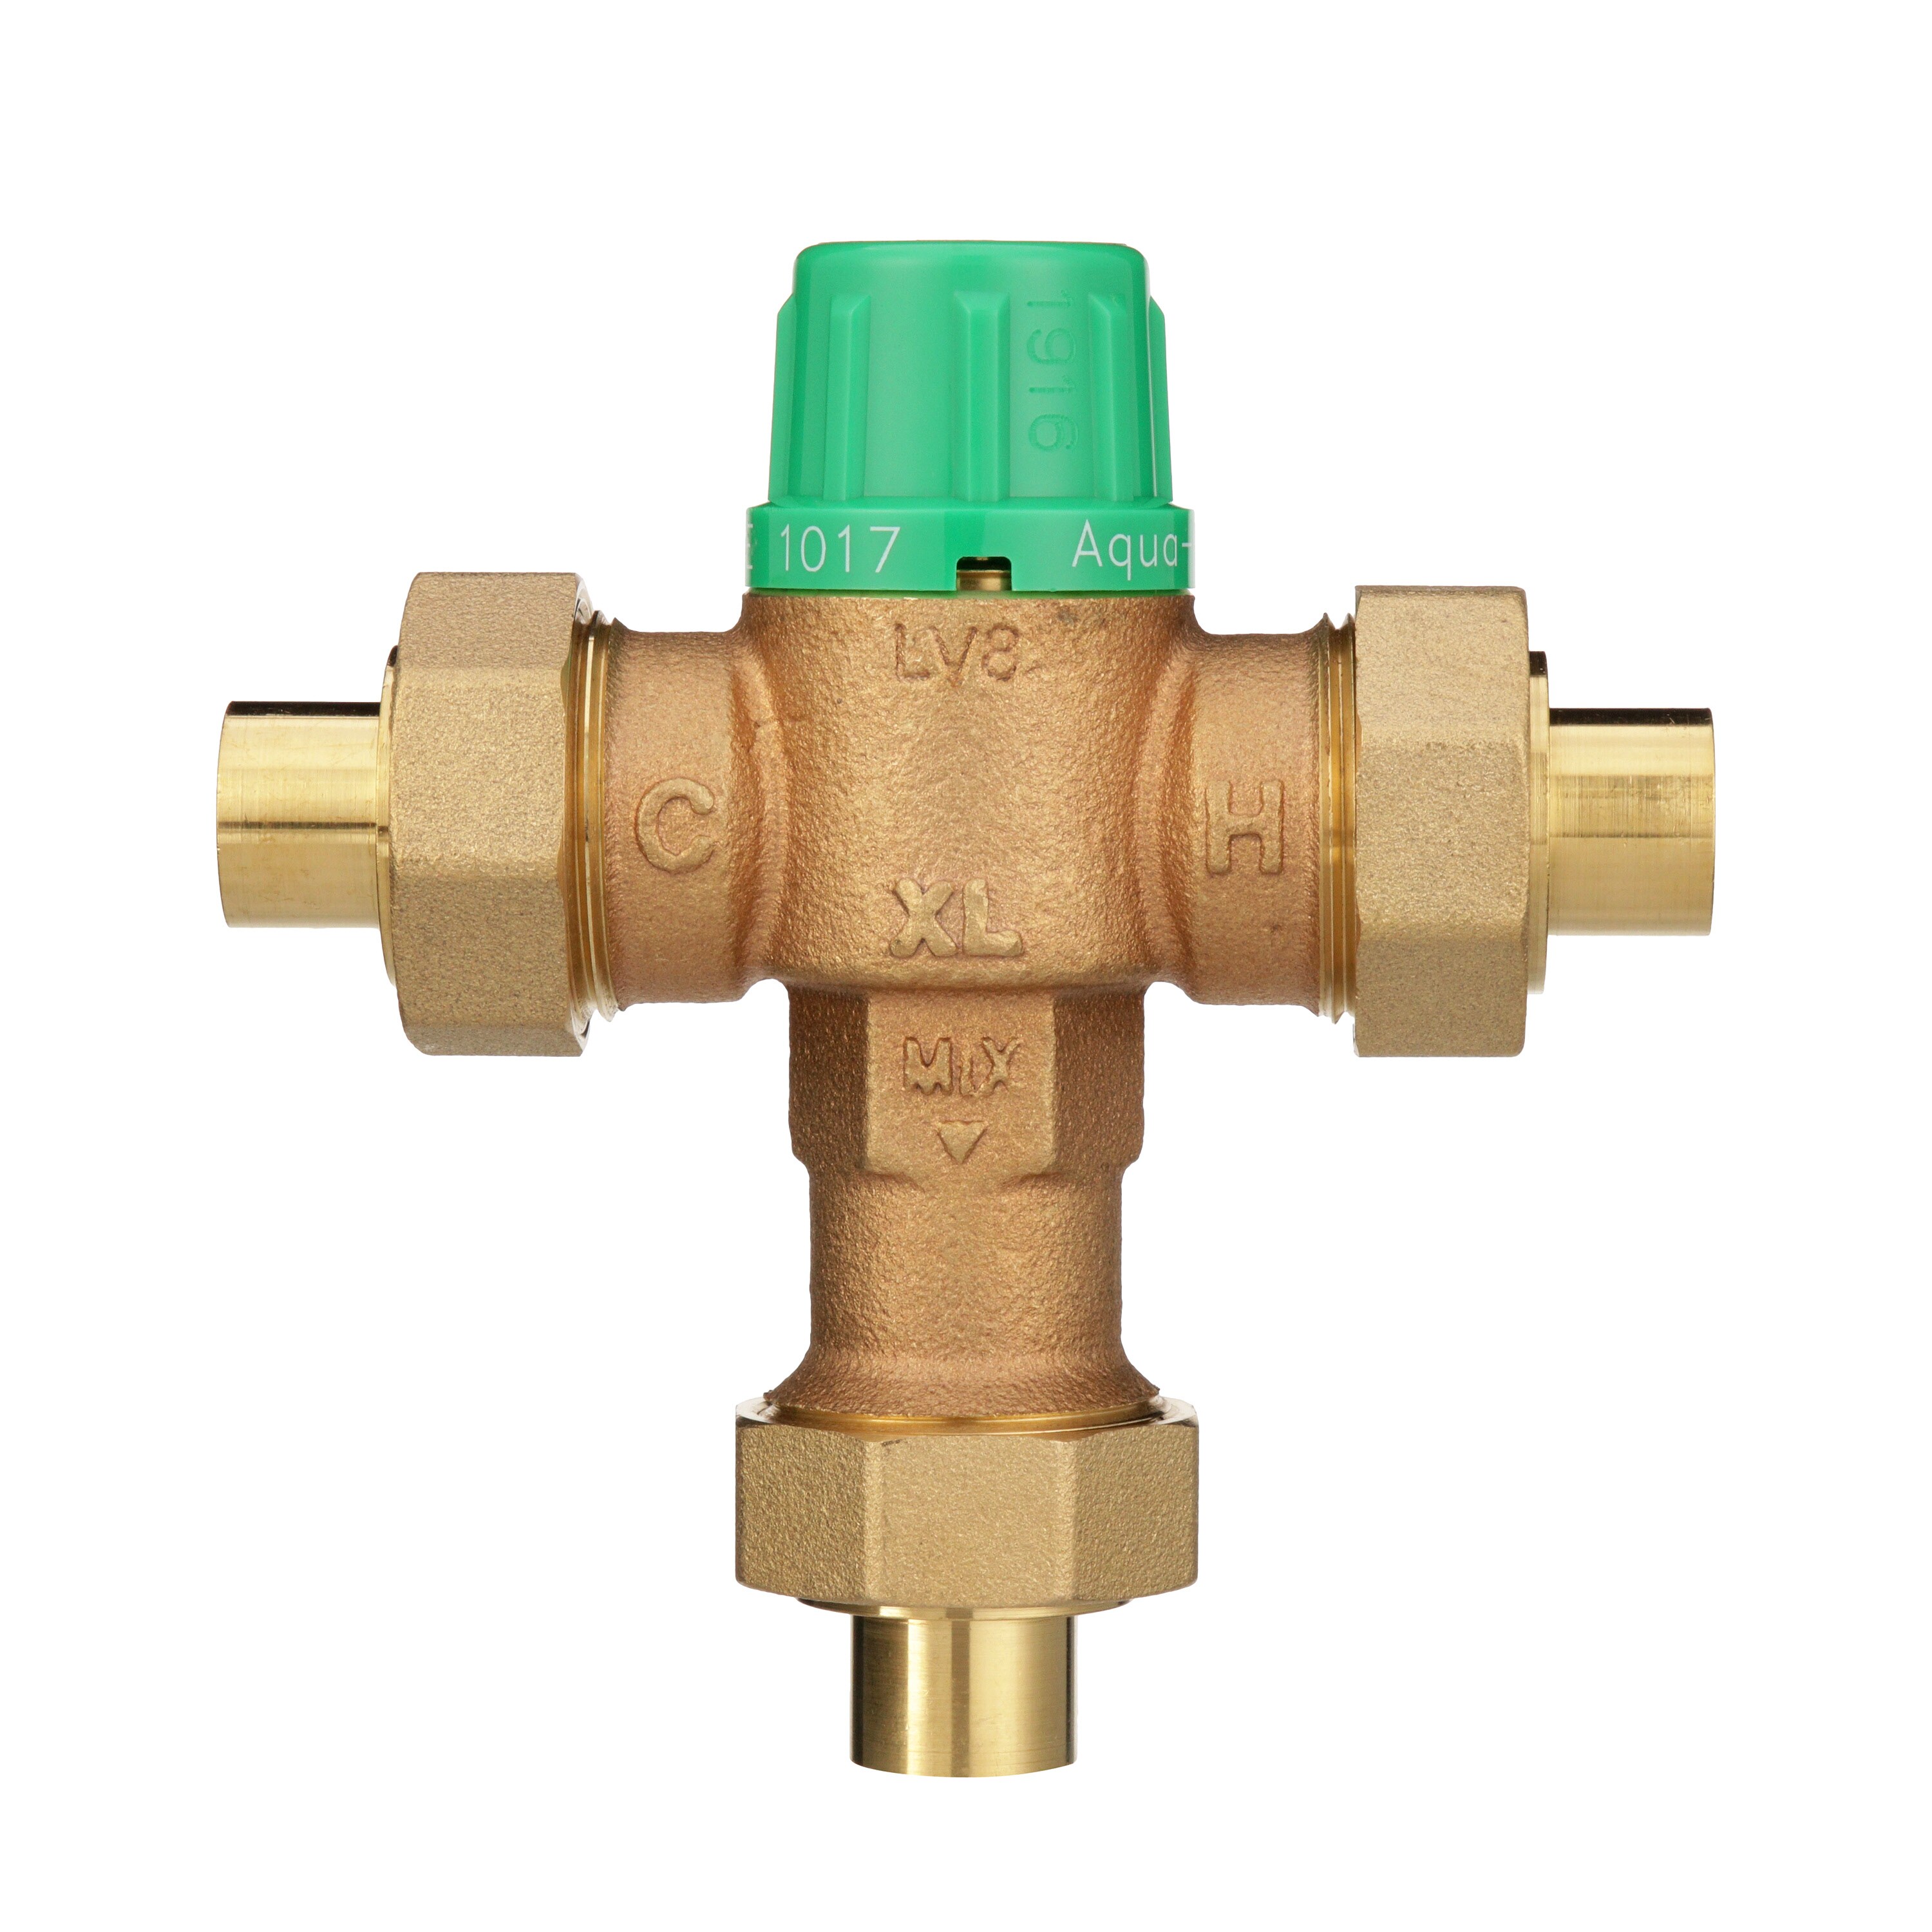 3/4" Mixing Valve For Domestic Hot Water~~Sweat Ports 